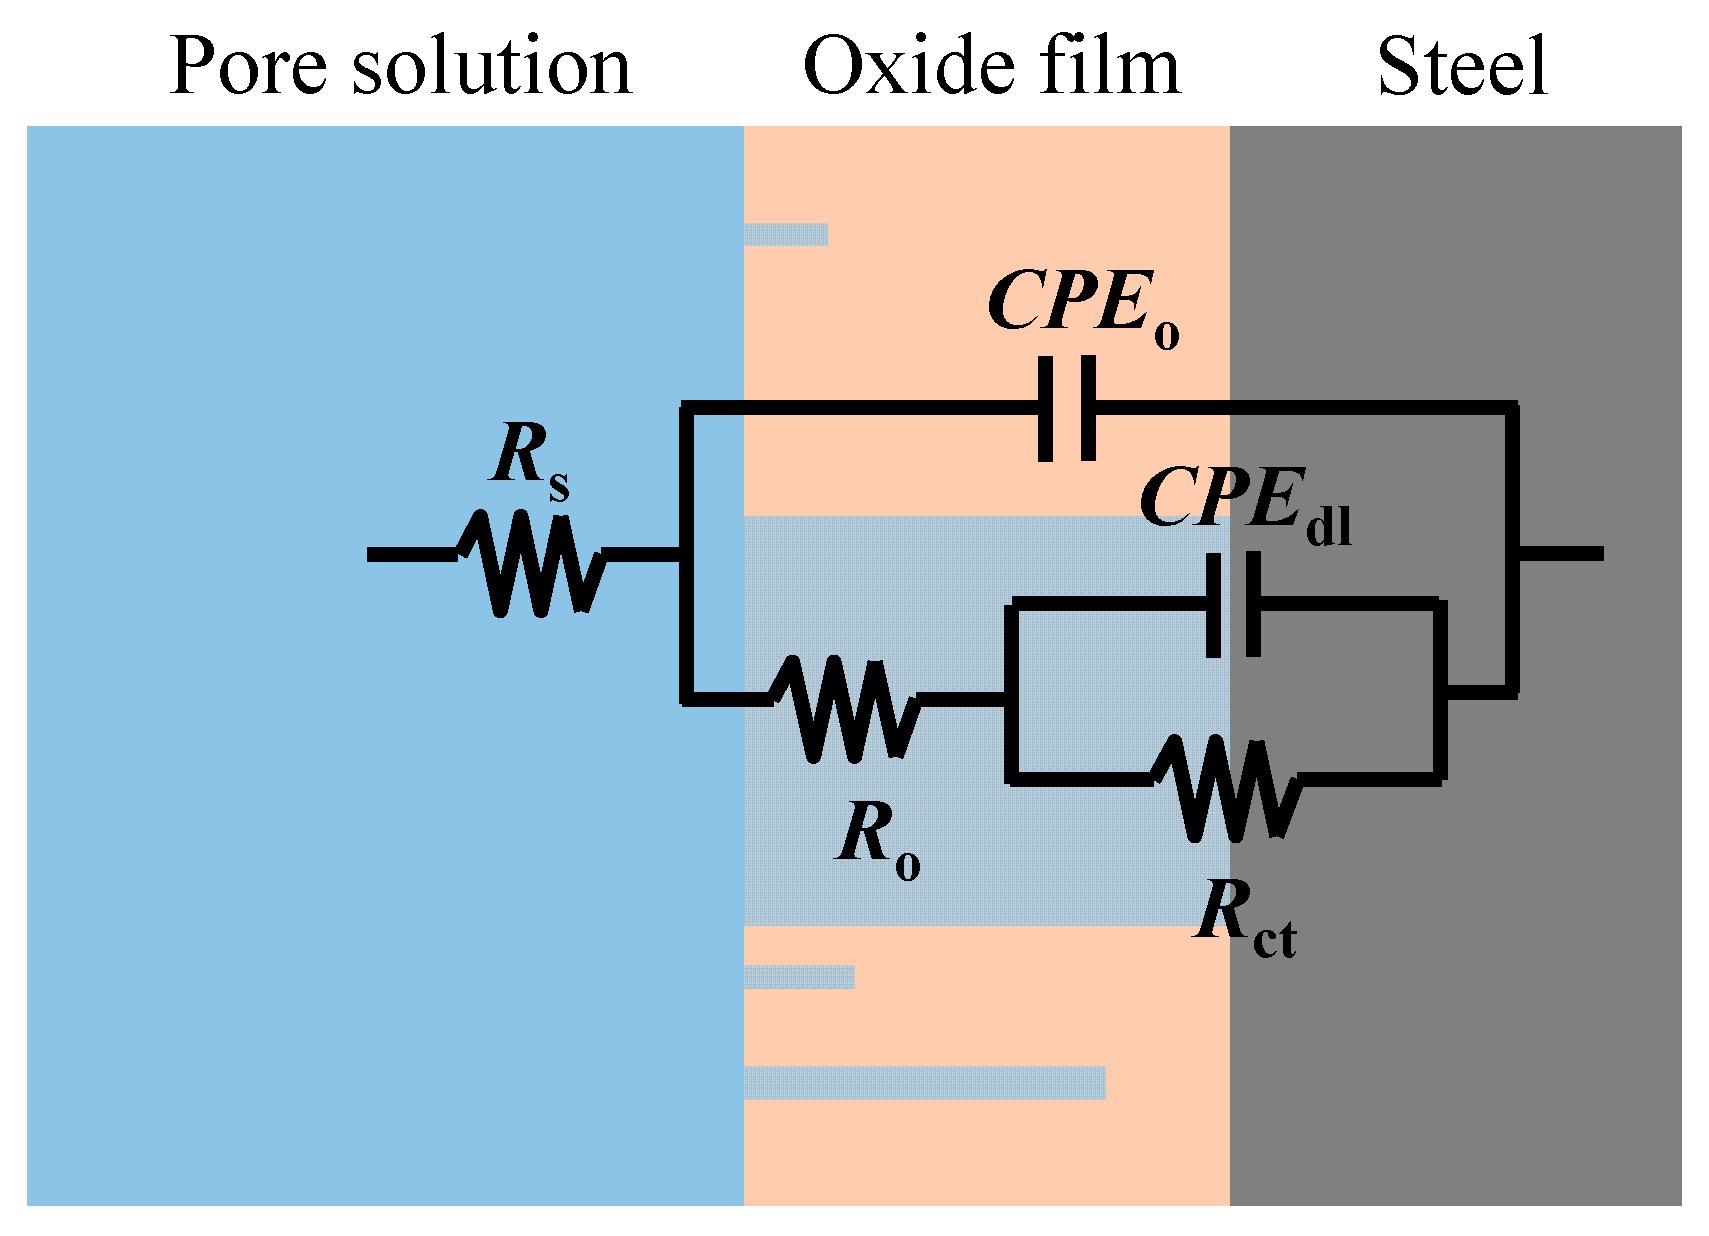 The equivalent circuit used to simulate the behavior of steel in the concrete pore solution.